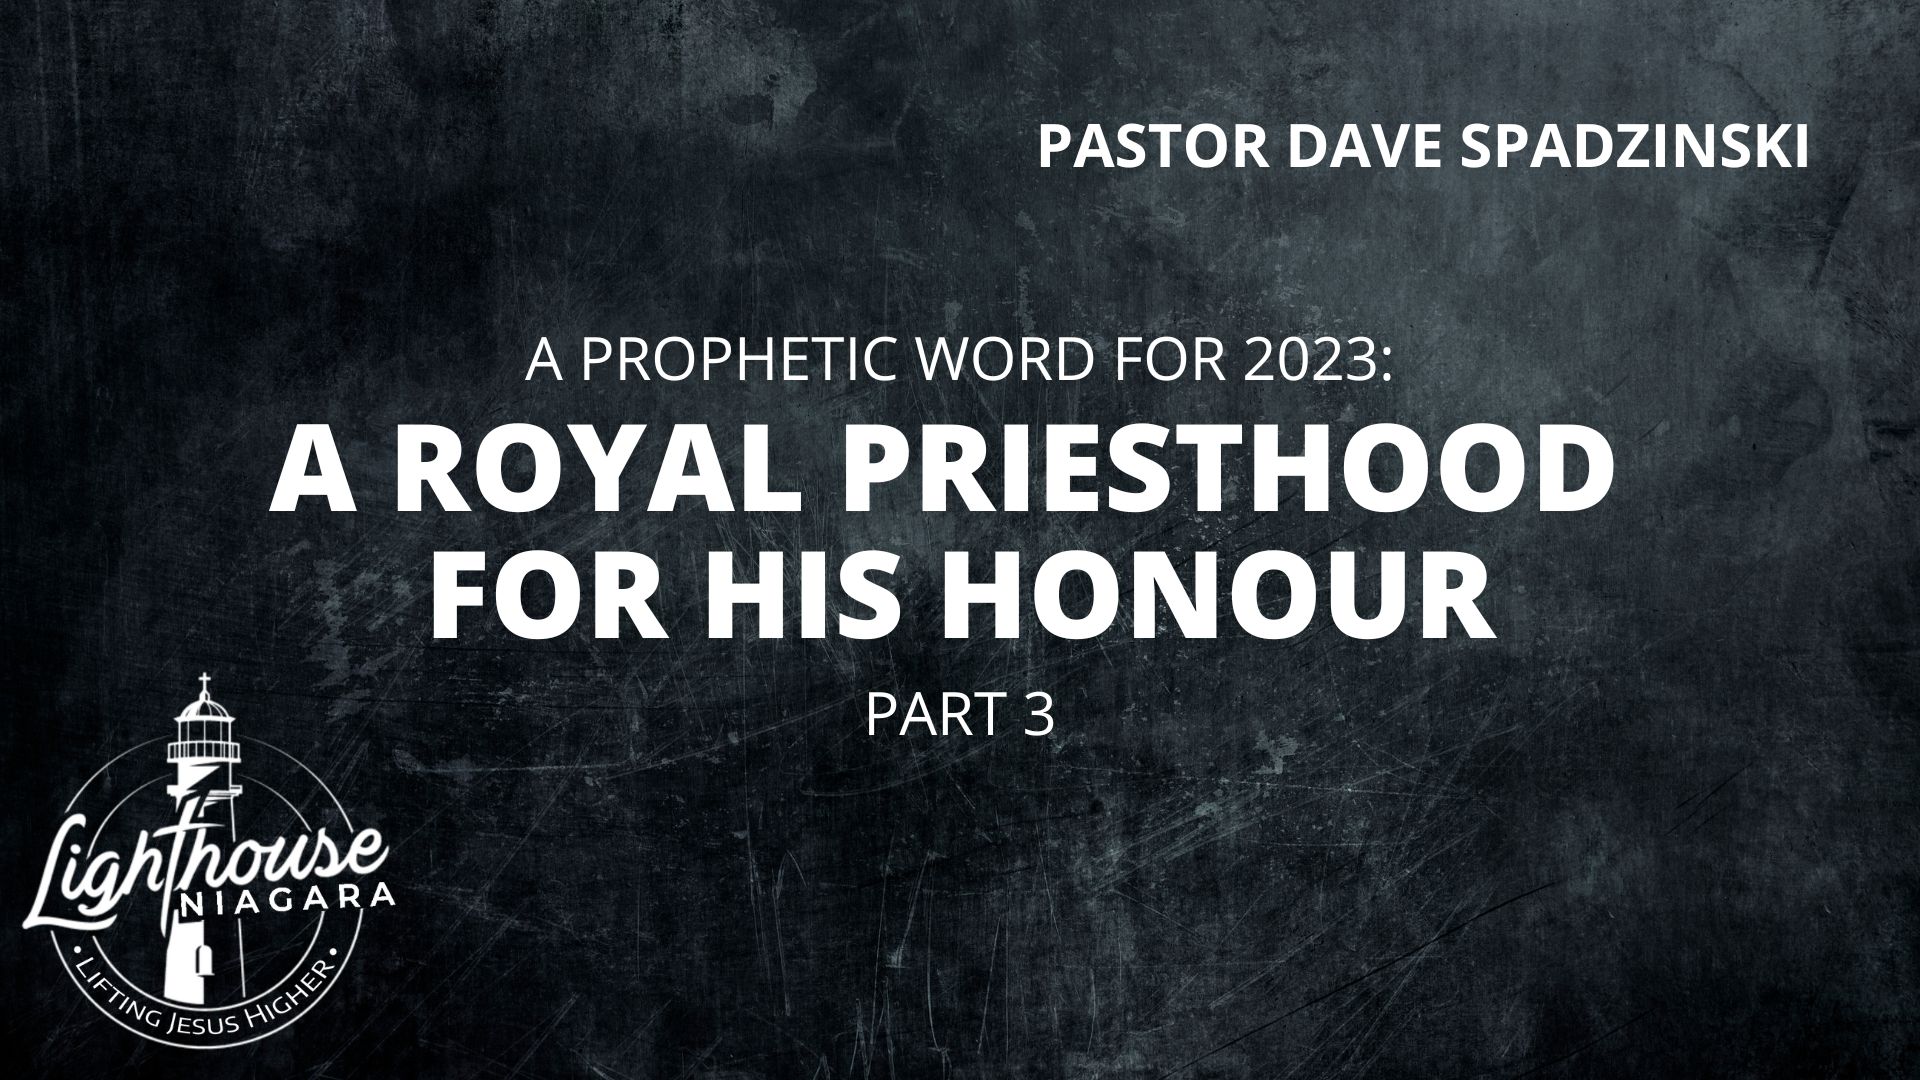 A Prophetic Word For 2023: A Royal Priesthood For His Honour - Pastor Dave Spadzinski